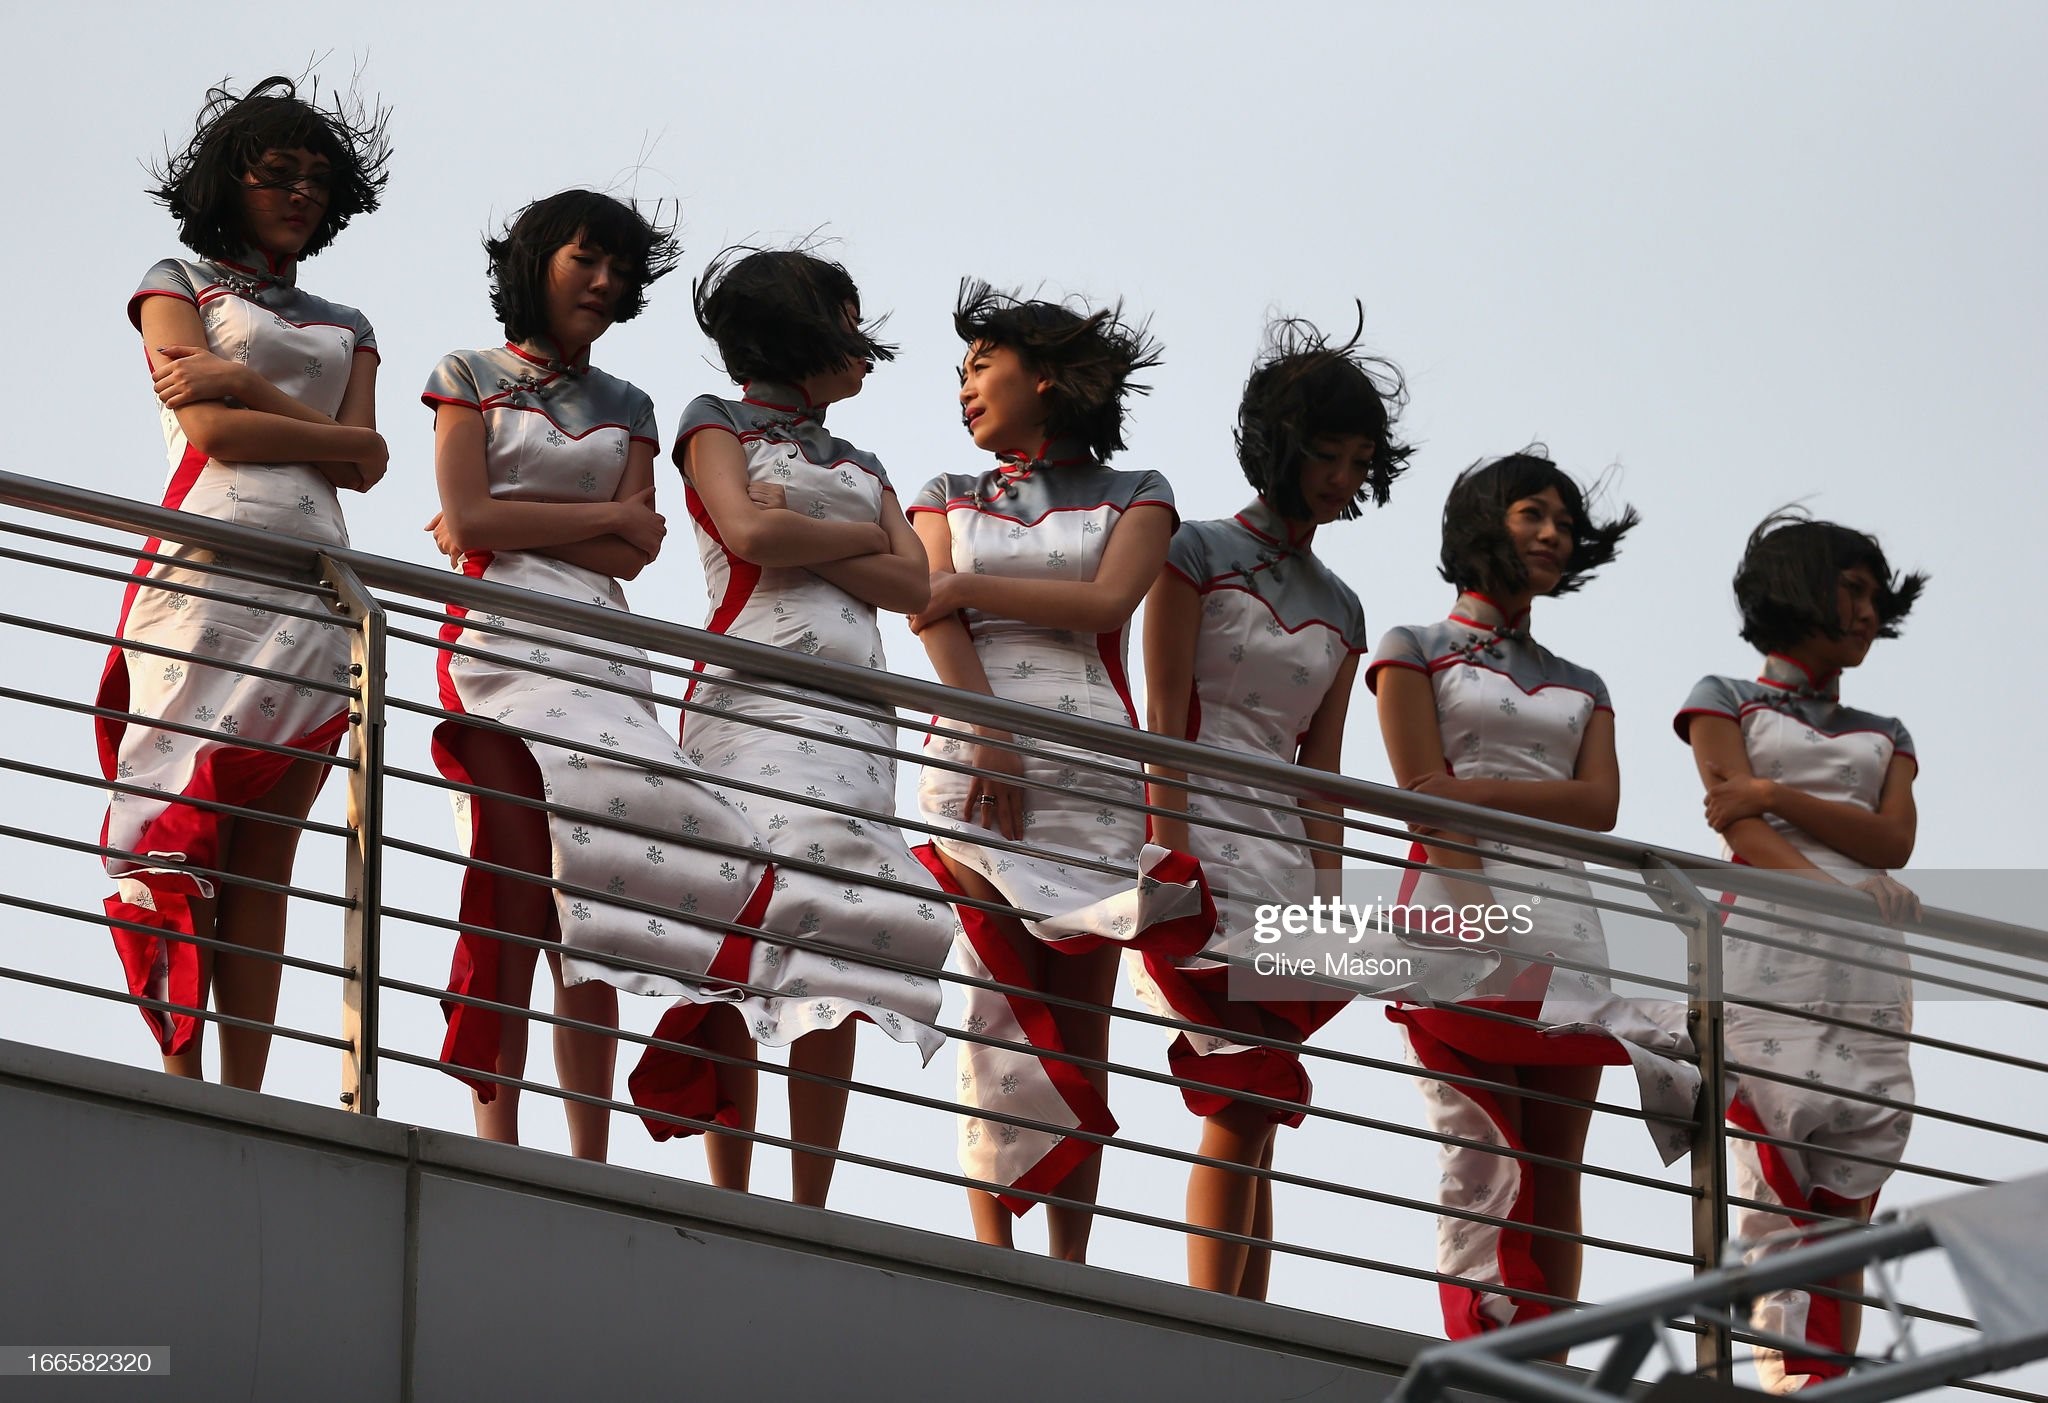 Grid girls line up before the podium ceremony following the Chinese Formula One Grand Prix at the Shanghai International Circuit on April 14, 2013 in Shanghai, China. 